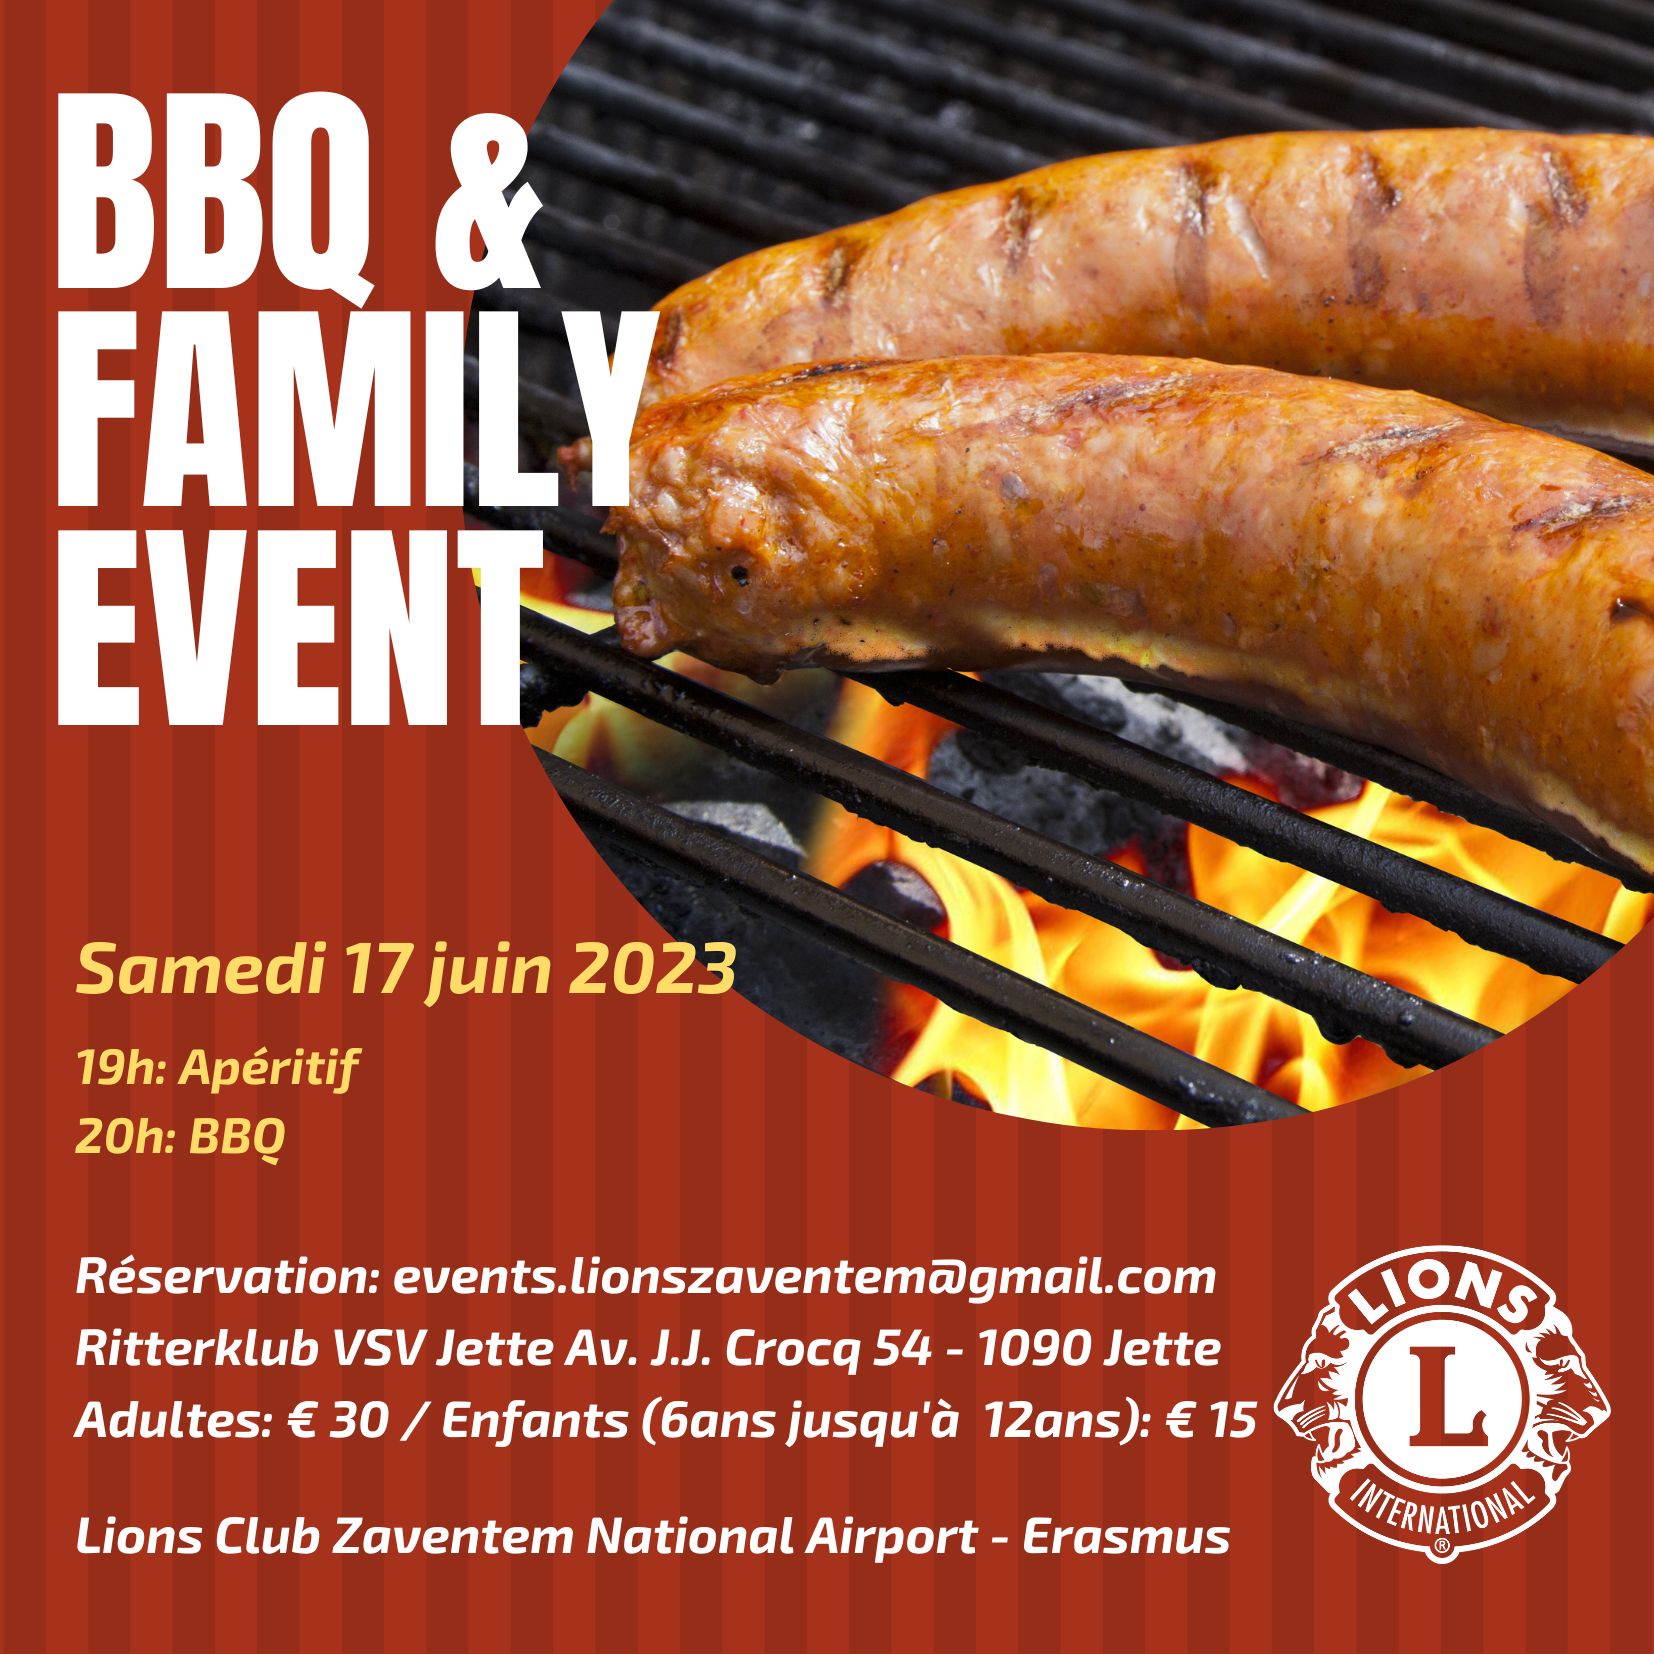 BBQ & Family event